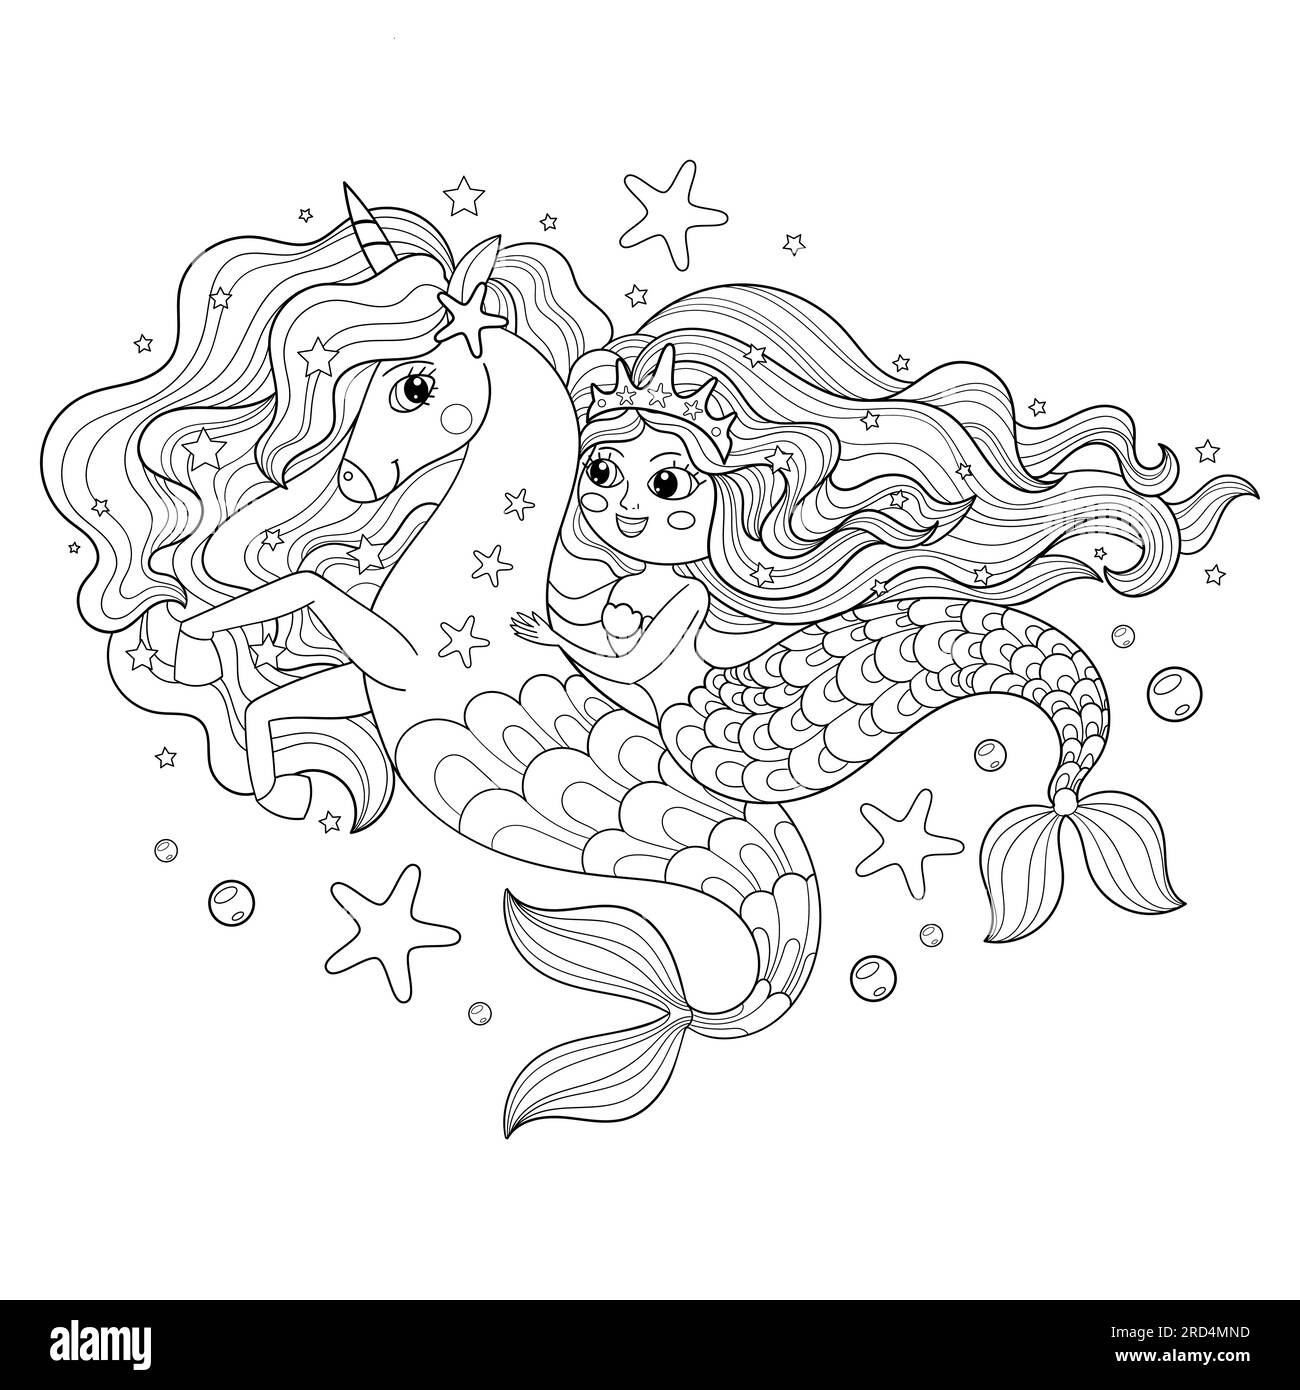 Mermaid riding a seahorse unicorn. Black and white linear drawing. The theme of the sea and magic. For children's coloring books design. prints, poste Stock Vector